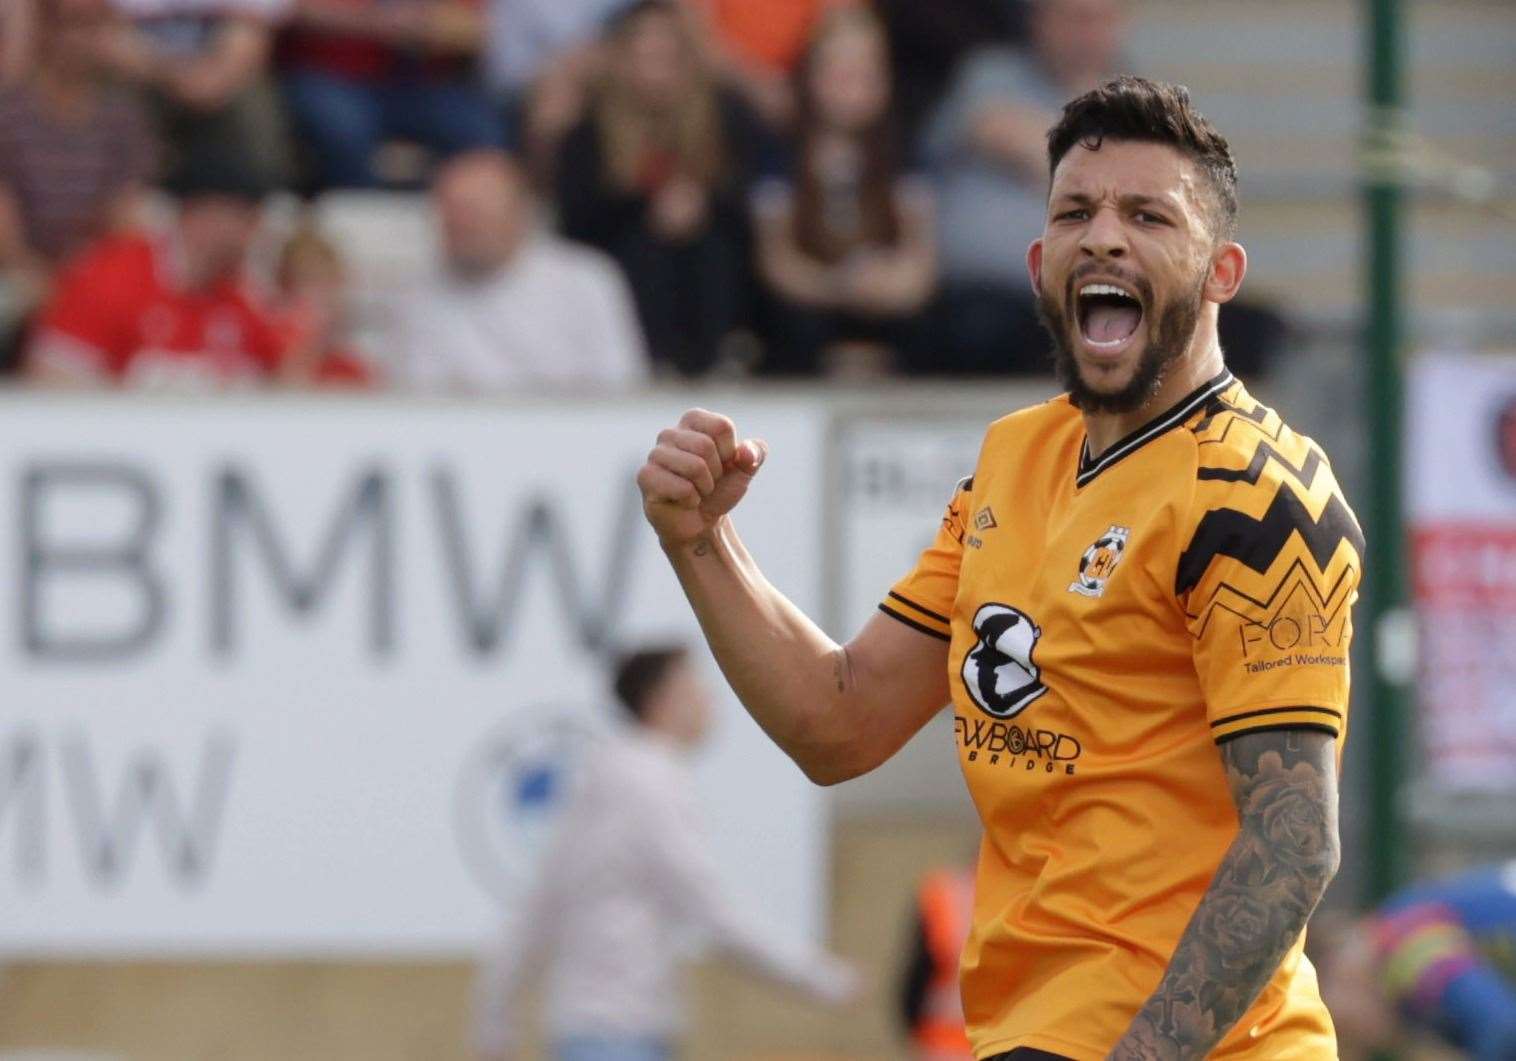 Macauley Bonne celebrates scoring for Cambridge United against Charlton Athletic. He left the Gills to link up with Neil Harris again Picture: Ben Phillips